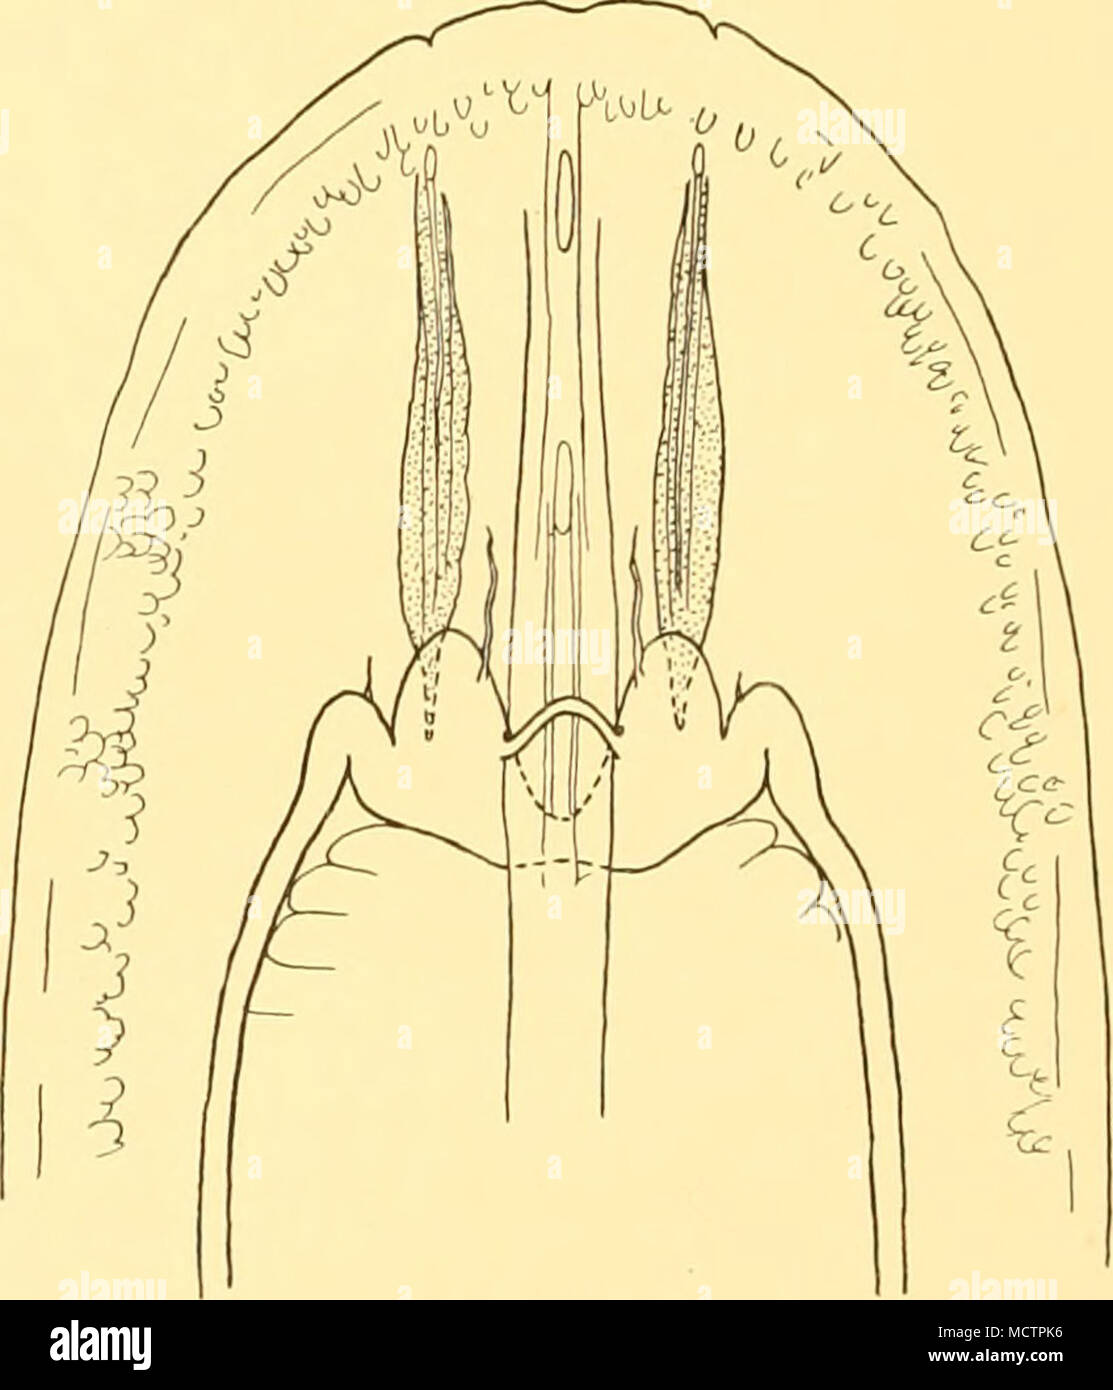 . Fig. 39. Amphipoms moseleyi, Hubrecht. Diagram of the anterior end of the body showing the brain, cerebral organs, cerebral subepithelial glands and the position of the opening of the rhynchodaeum and the opening of the oesophagus into it. Stock Photo